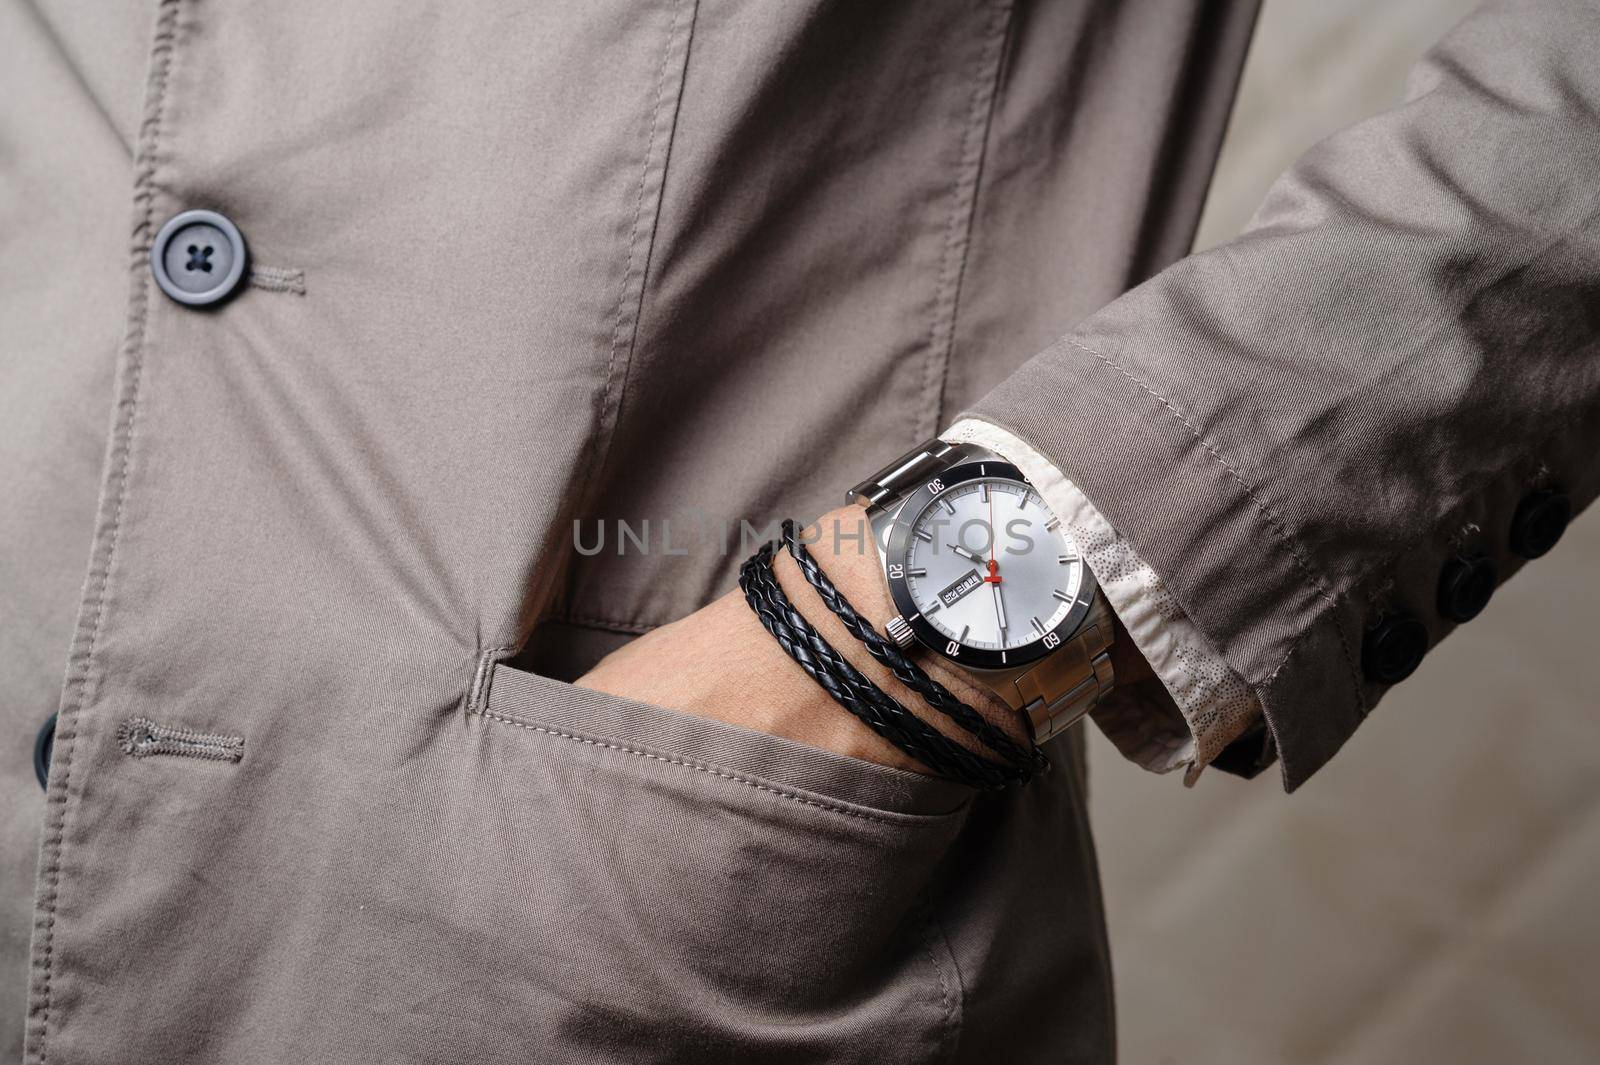 closeup the man's wrist wearing bracelets and wristwatch, casual style of men accessories.